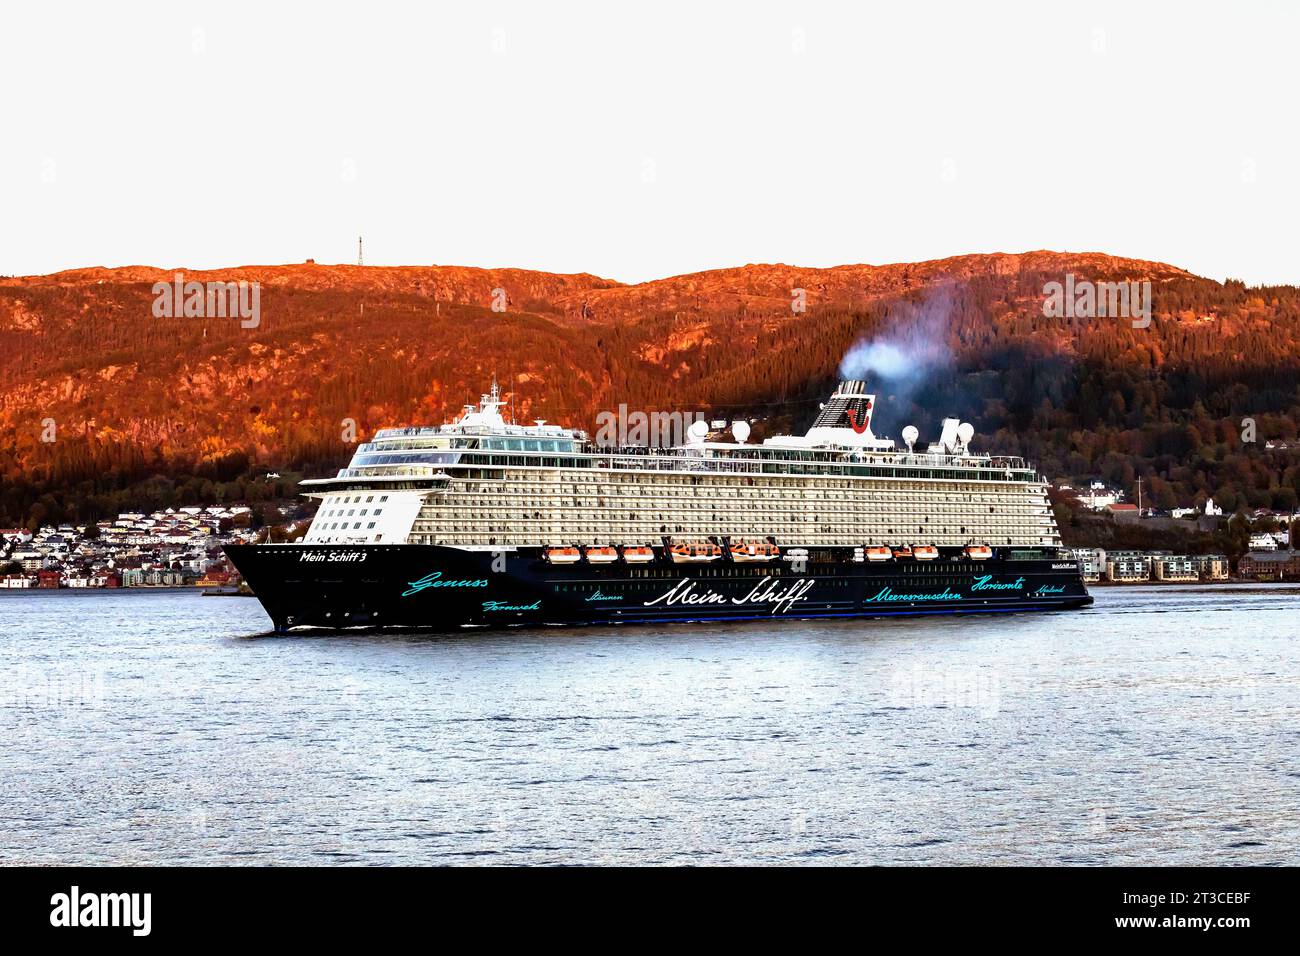 Cruise ship Mein Schiff 3 at Byfjorden, departing late evening from the port of Bergen, Norway. Stock Photo